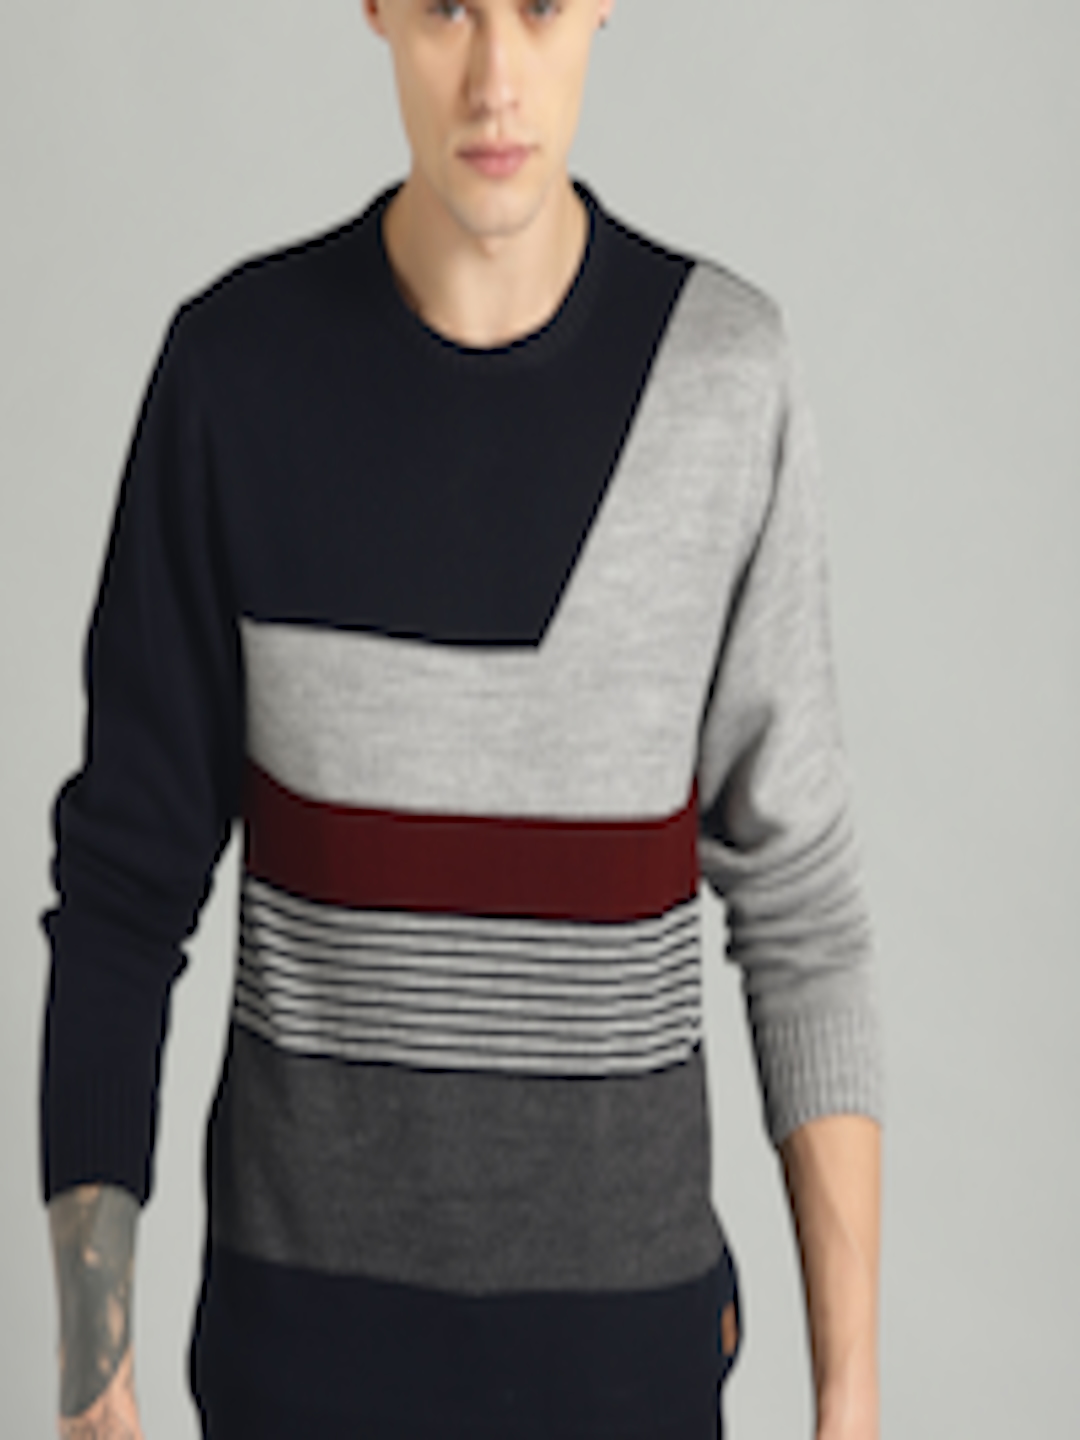 Buy The Roadster Lifestyle Co Men Navy Blue & Grey Striped Sweater ...